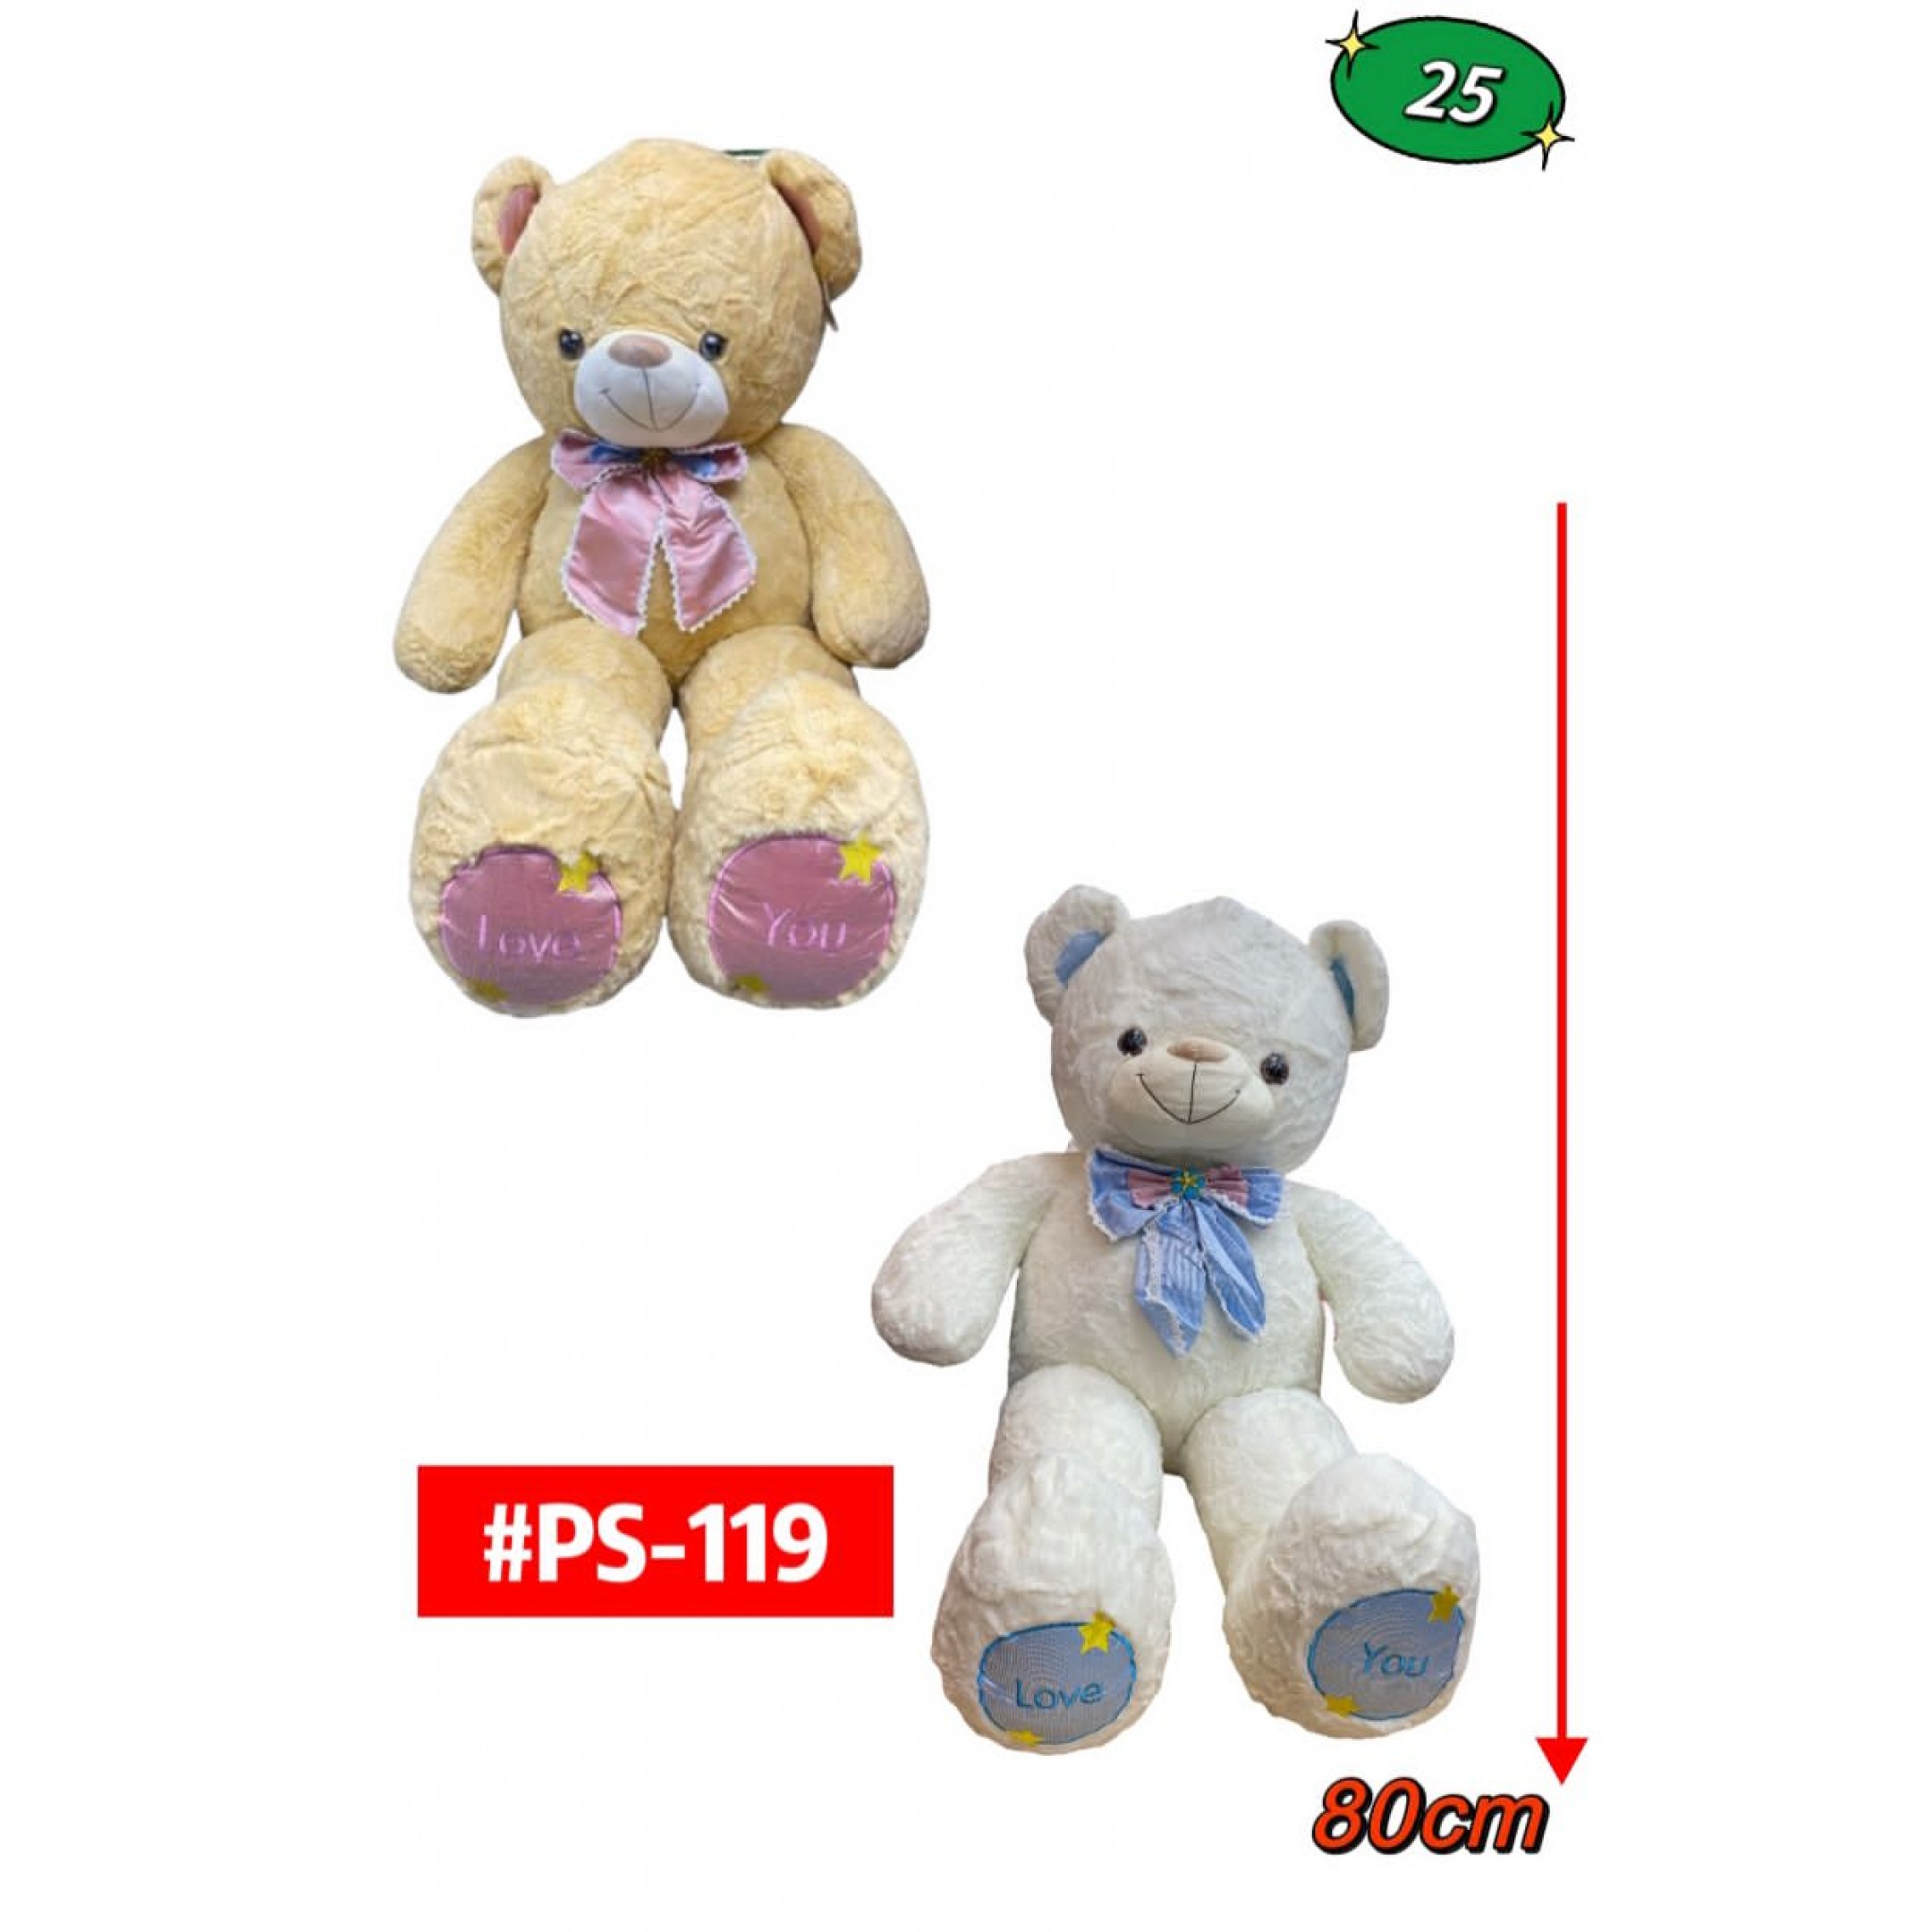 PELUCHES OSO 80cm #PS-119